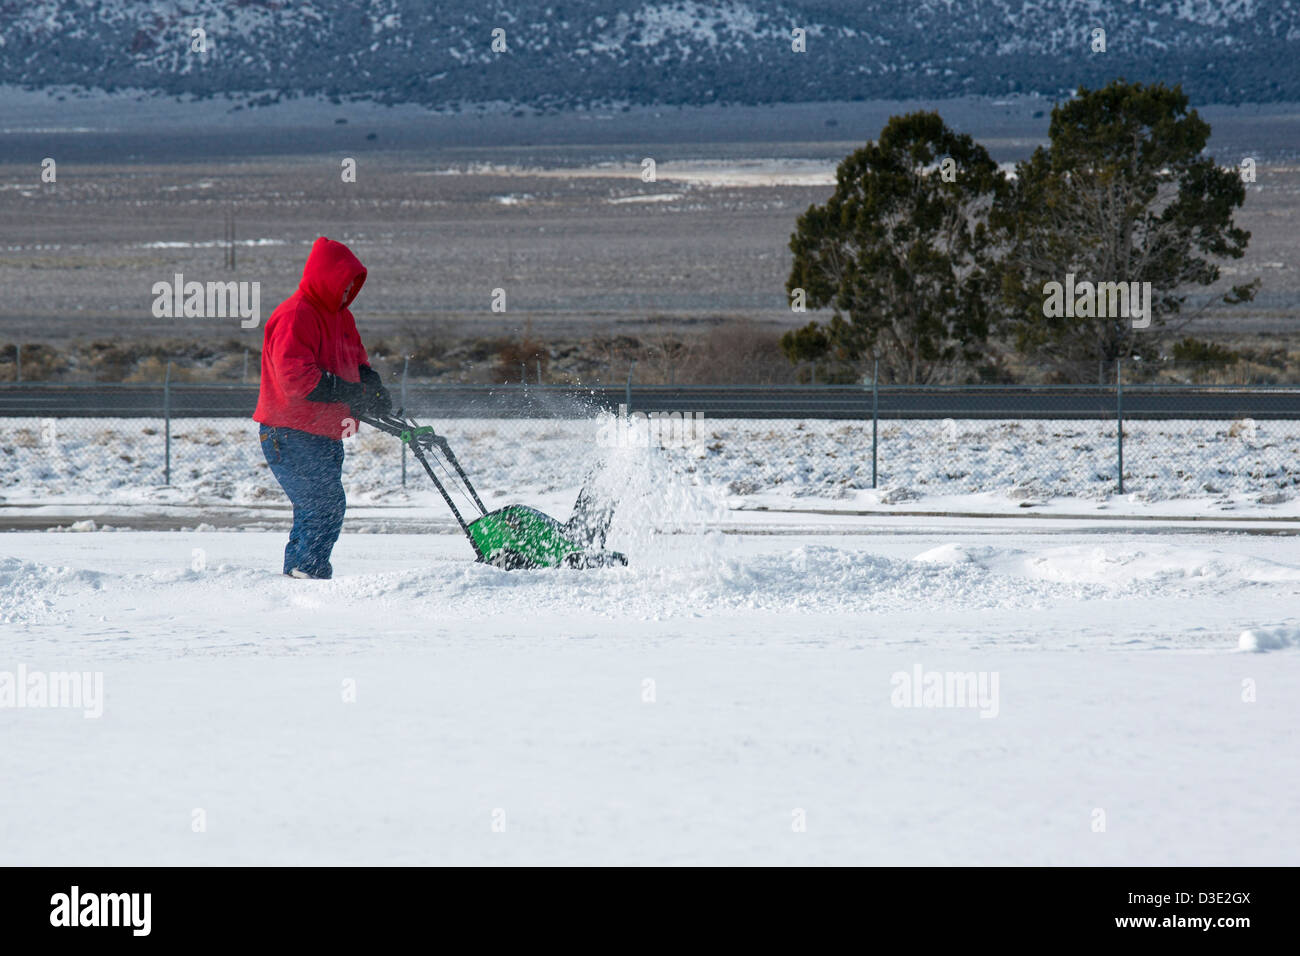 Paragonah, Utah - A worker clear snow at a rest area on Interstate 15 in Southwestern Utah. Stock Photo